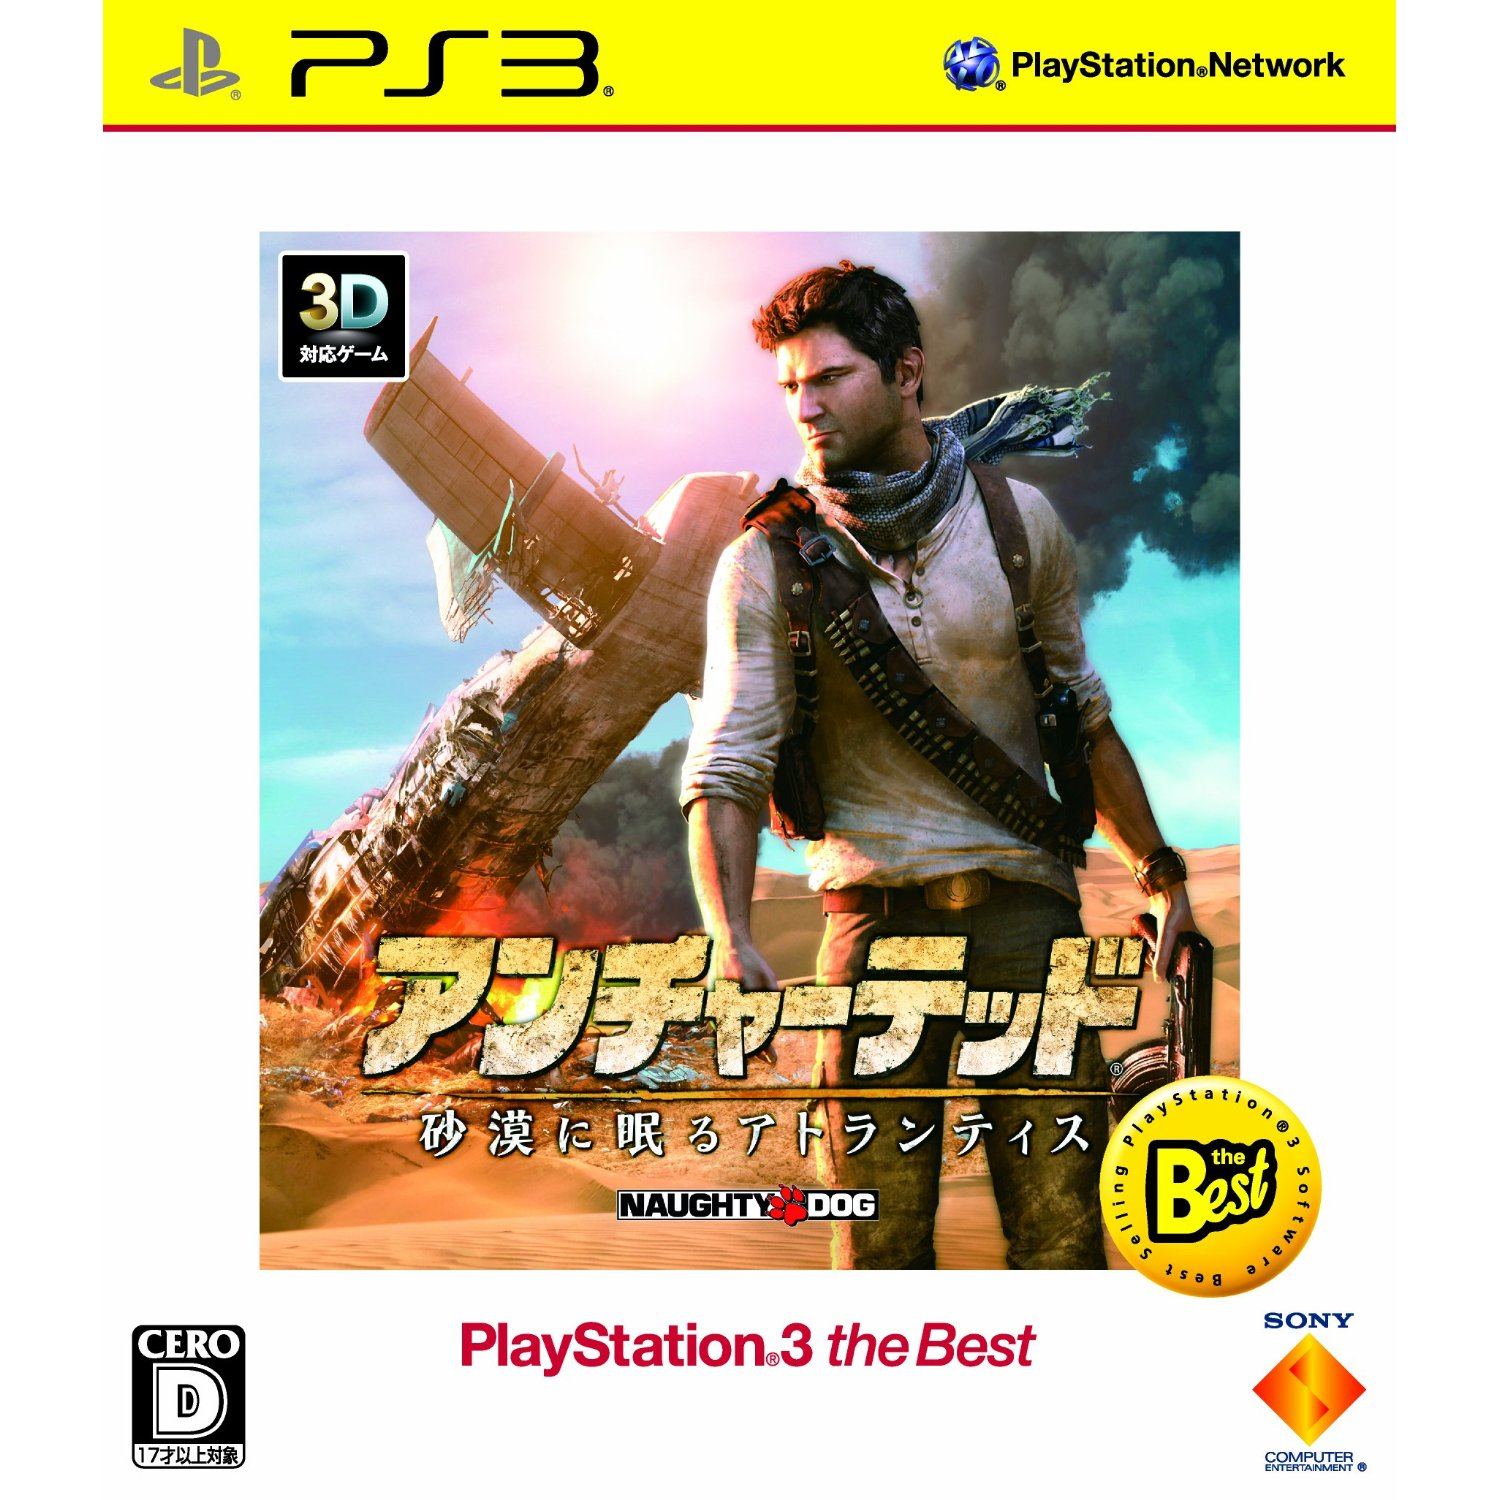 Uncharted 3: Drake's Deception (Playstation3 the Best) for PlayStation 3